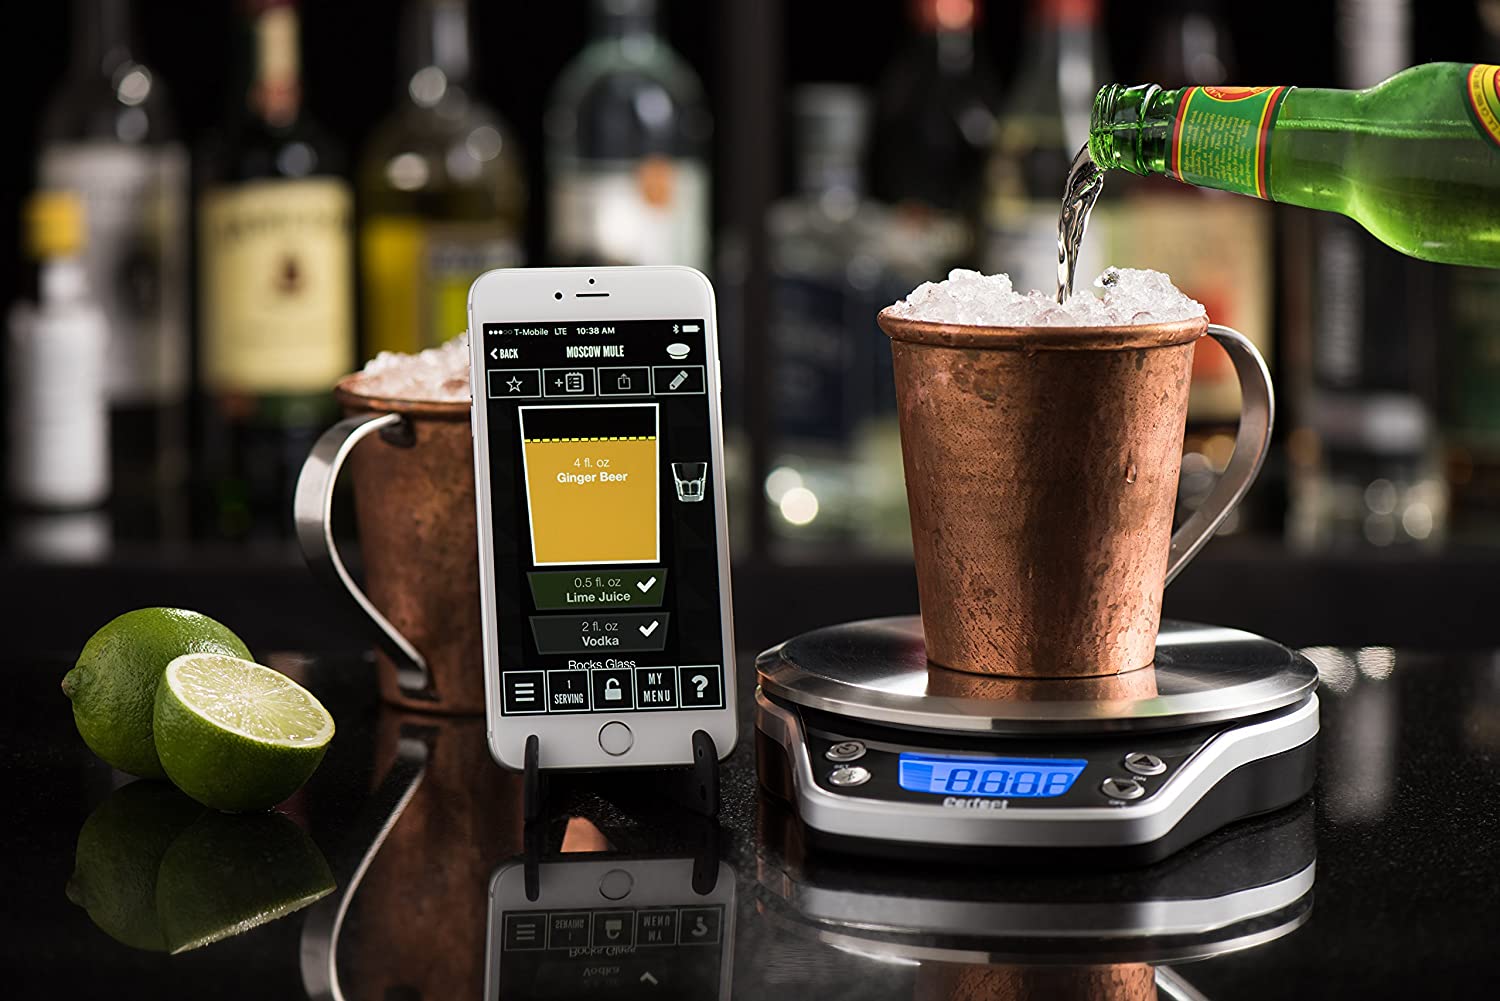 Perfect Drink Pro Smart Scale receipts